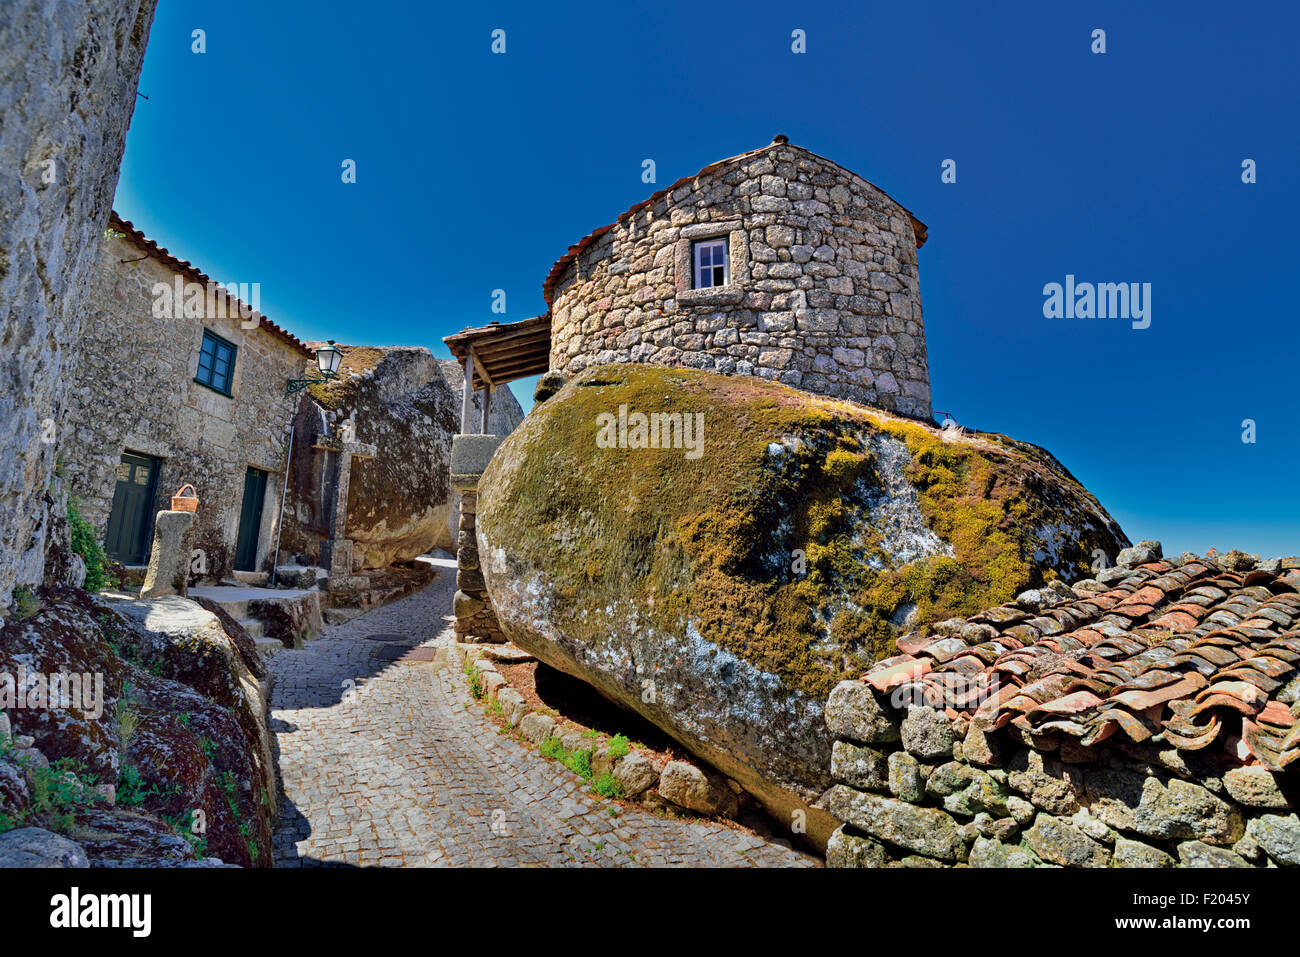 Portugal: Medieval stone alley and houses in historic village Mosanto Stock Photo